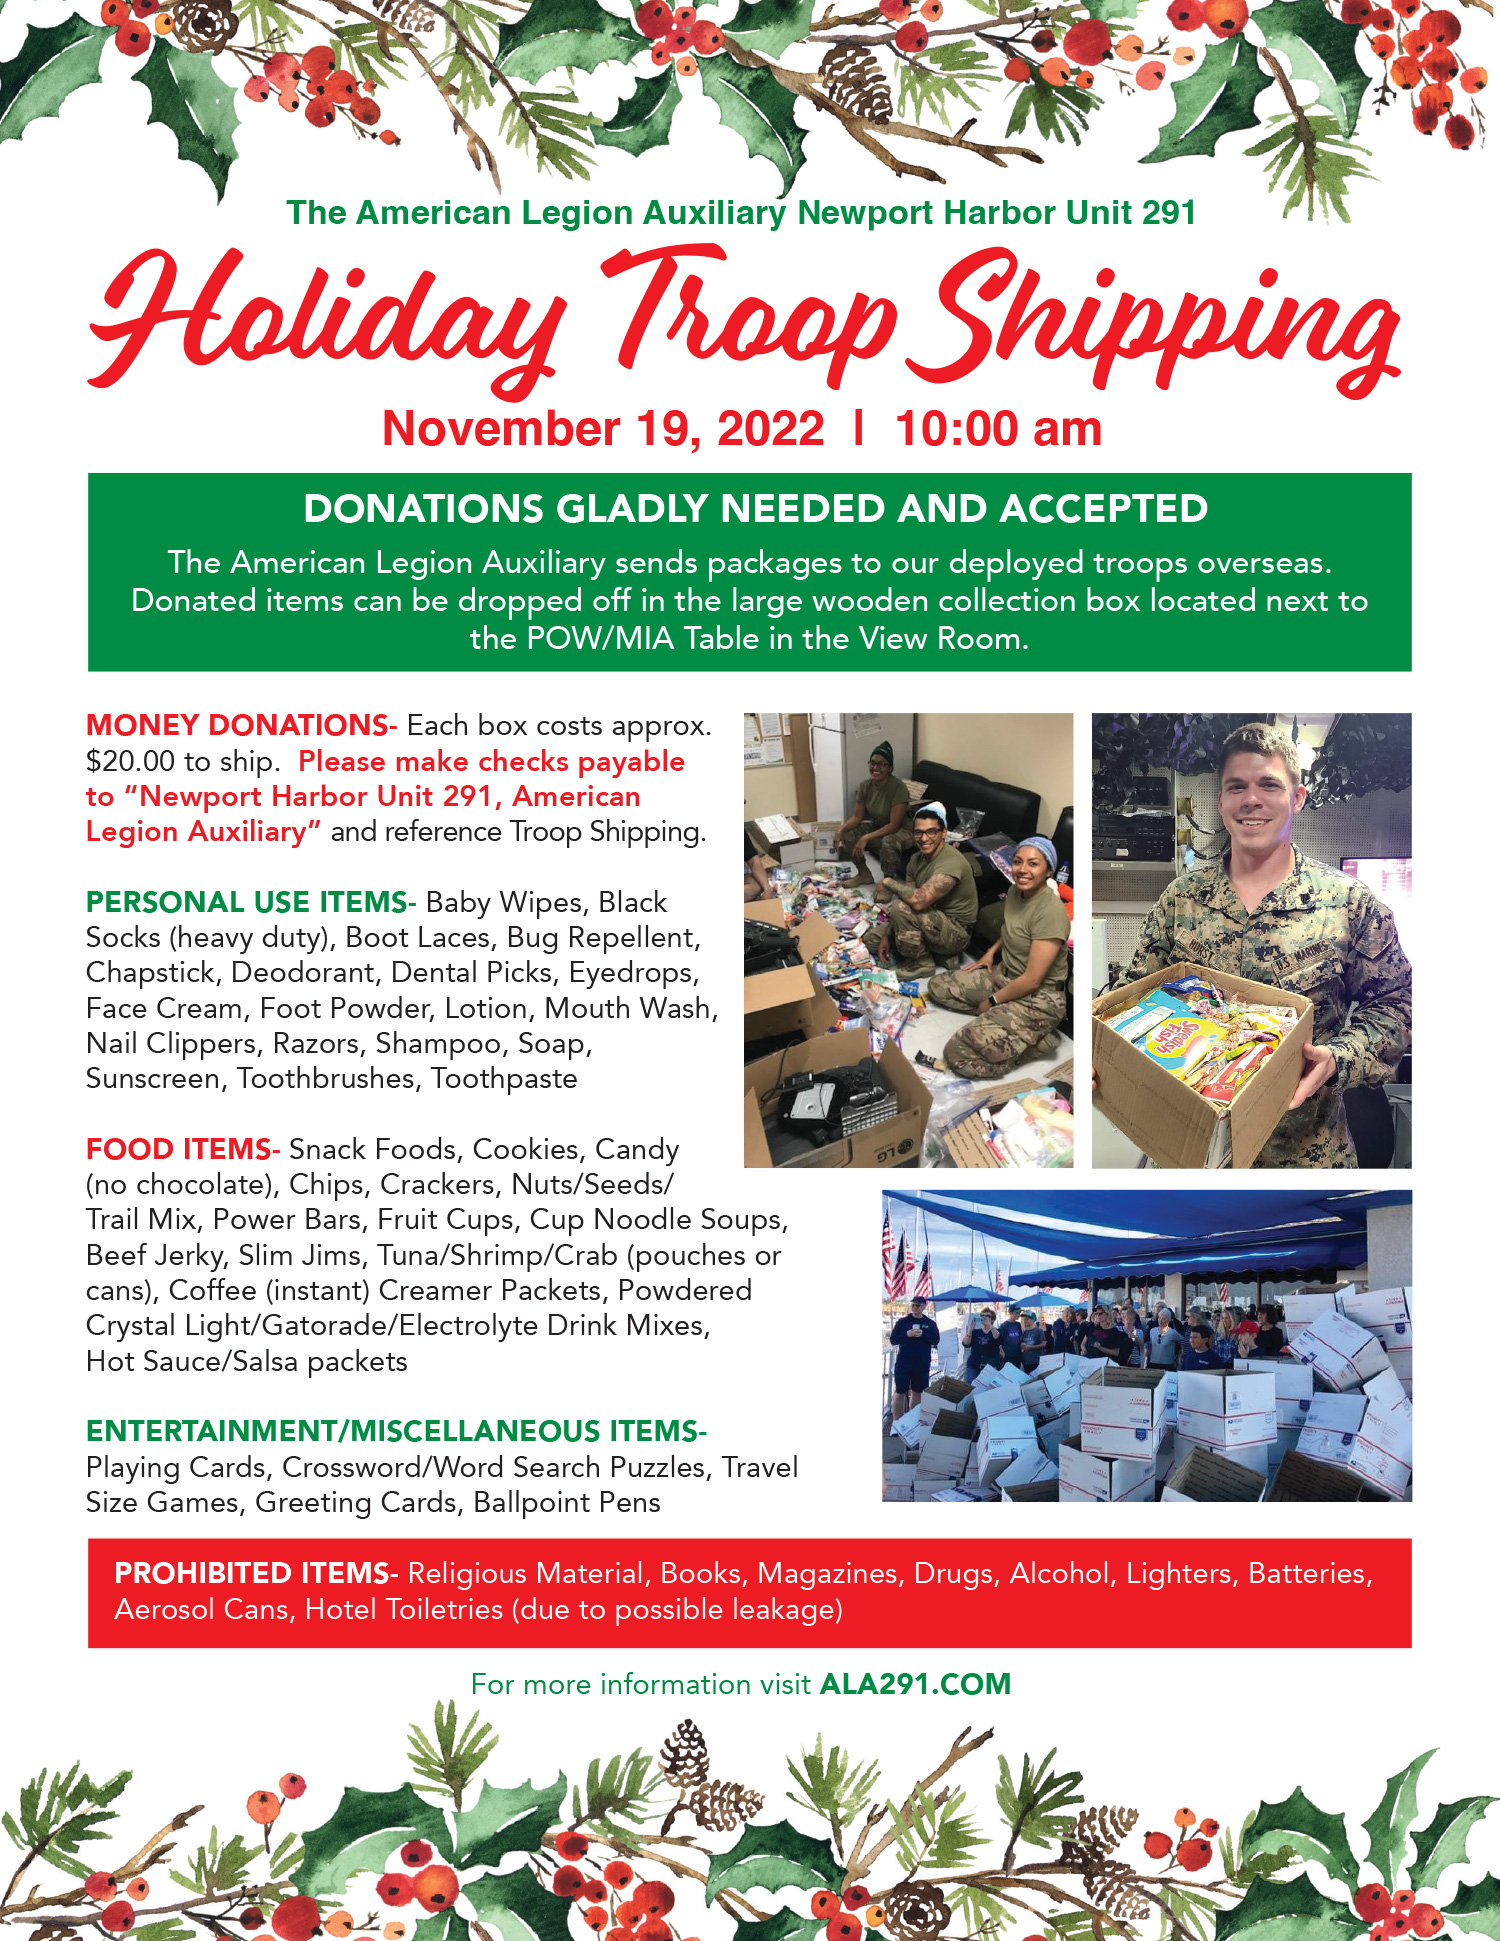 22-Holiday-Troop-Shipping-Flyer